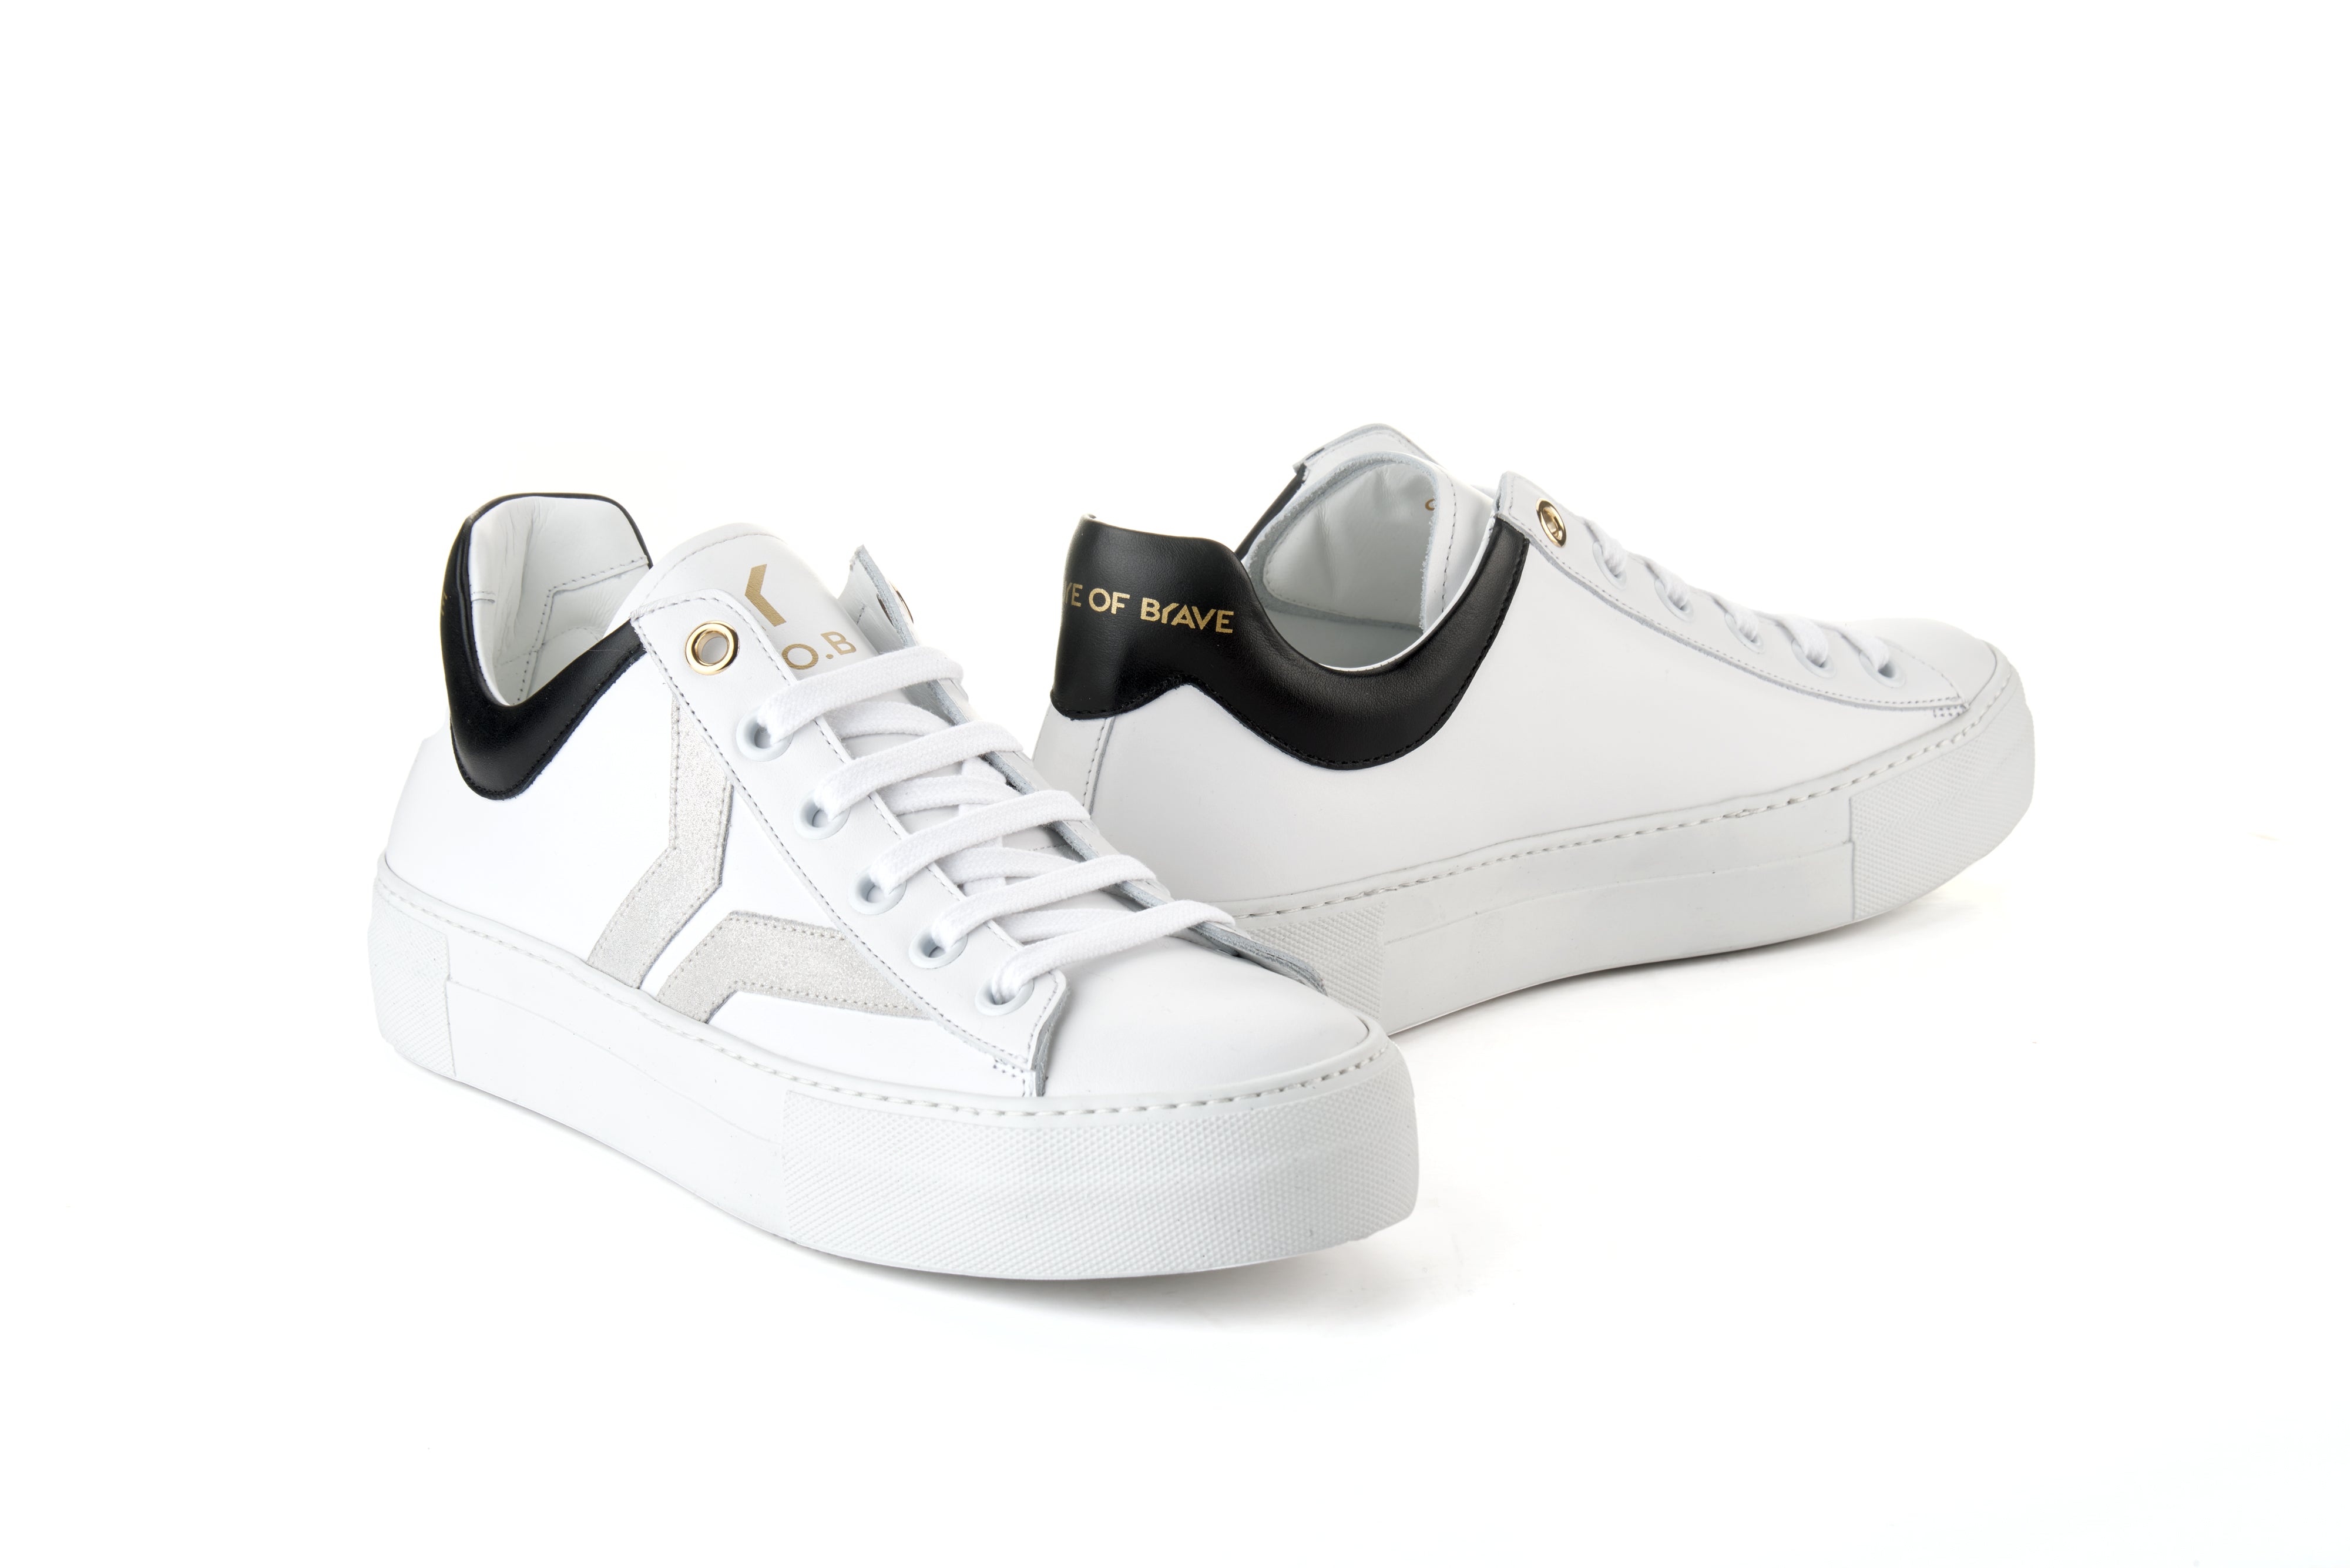 Courage S33 Women White leather black ankle silver wing low cut